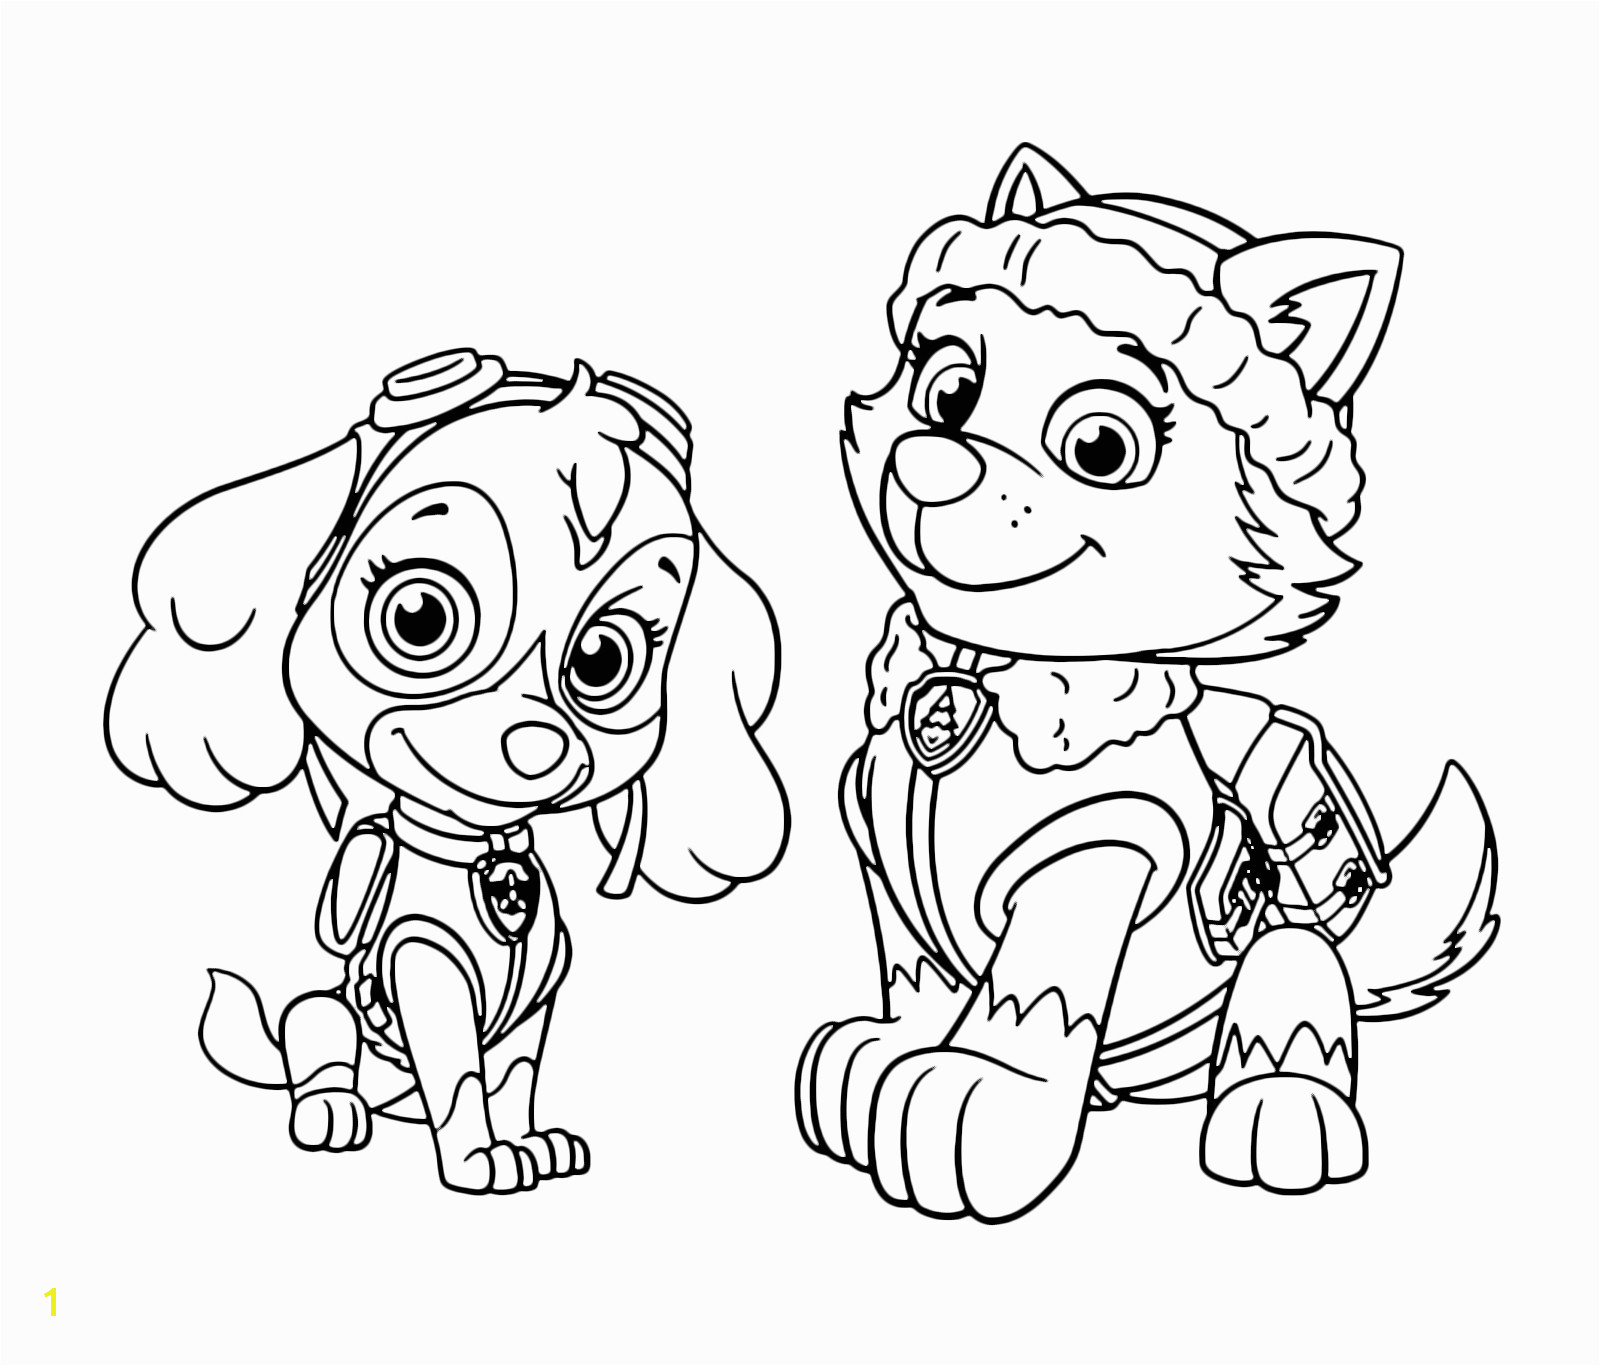 Skye Paw Patrol Coloring Pages To Print Free Books Throughout